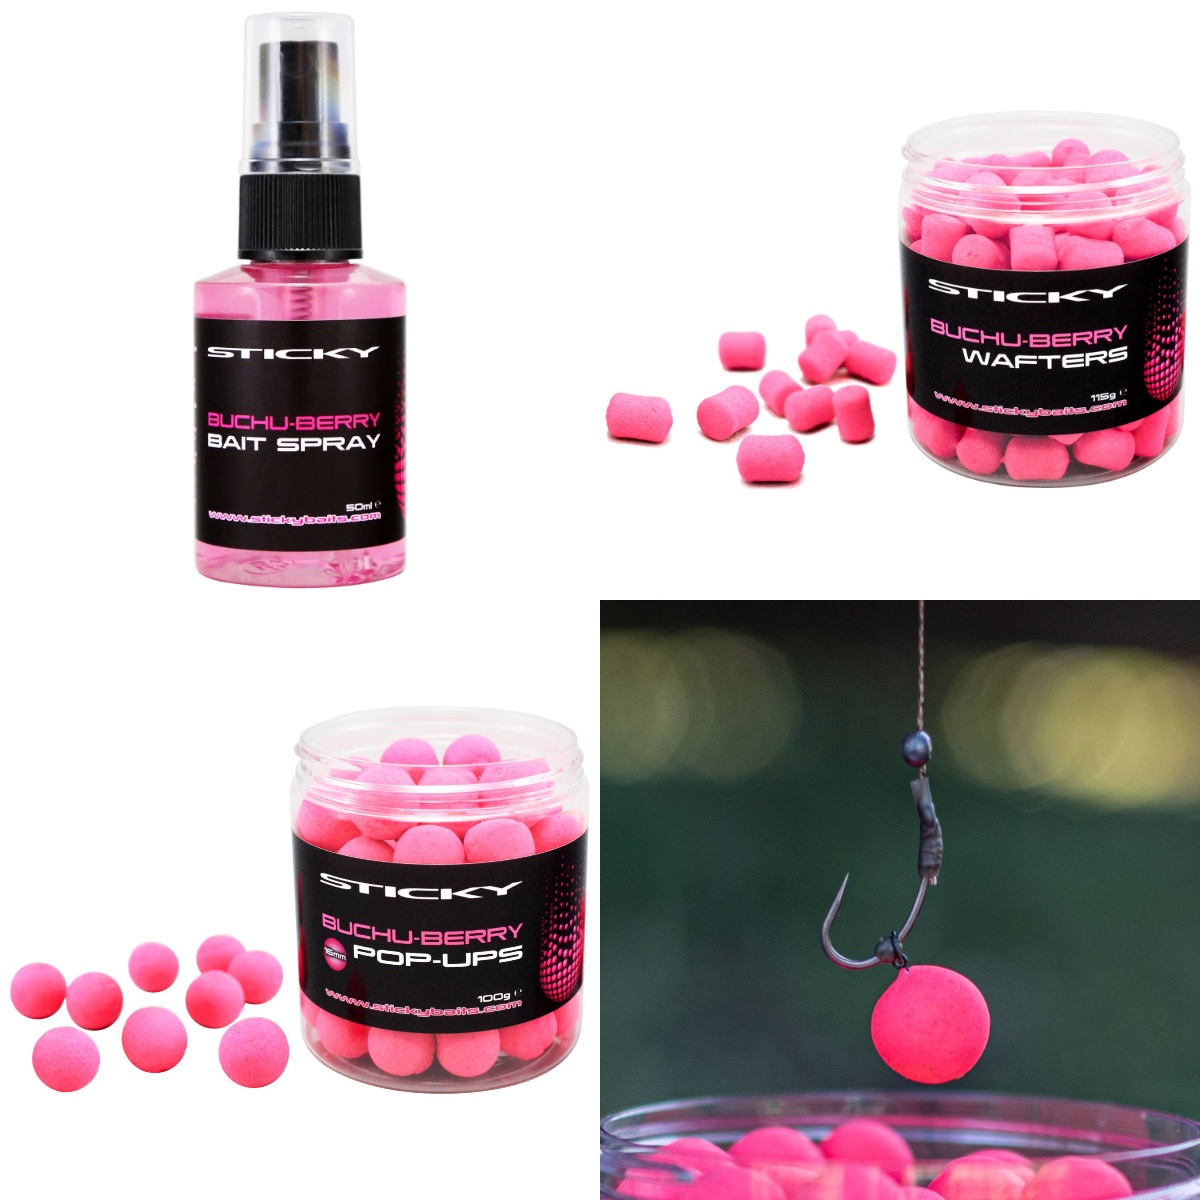 Sticky Baits Buchu-Berry Pop-Ups/Wafters *New* Free Delivery 